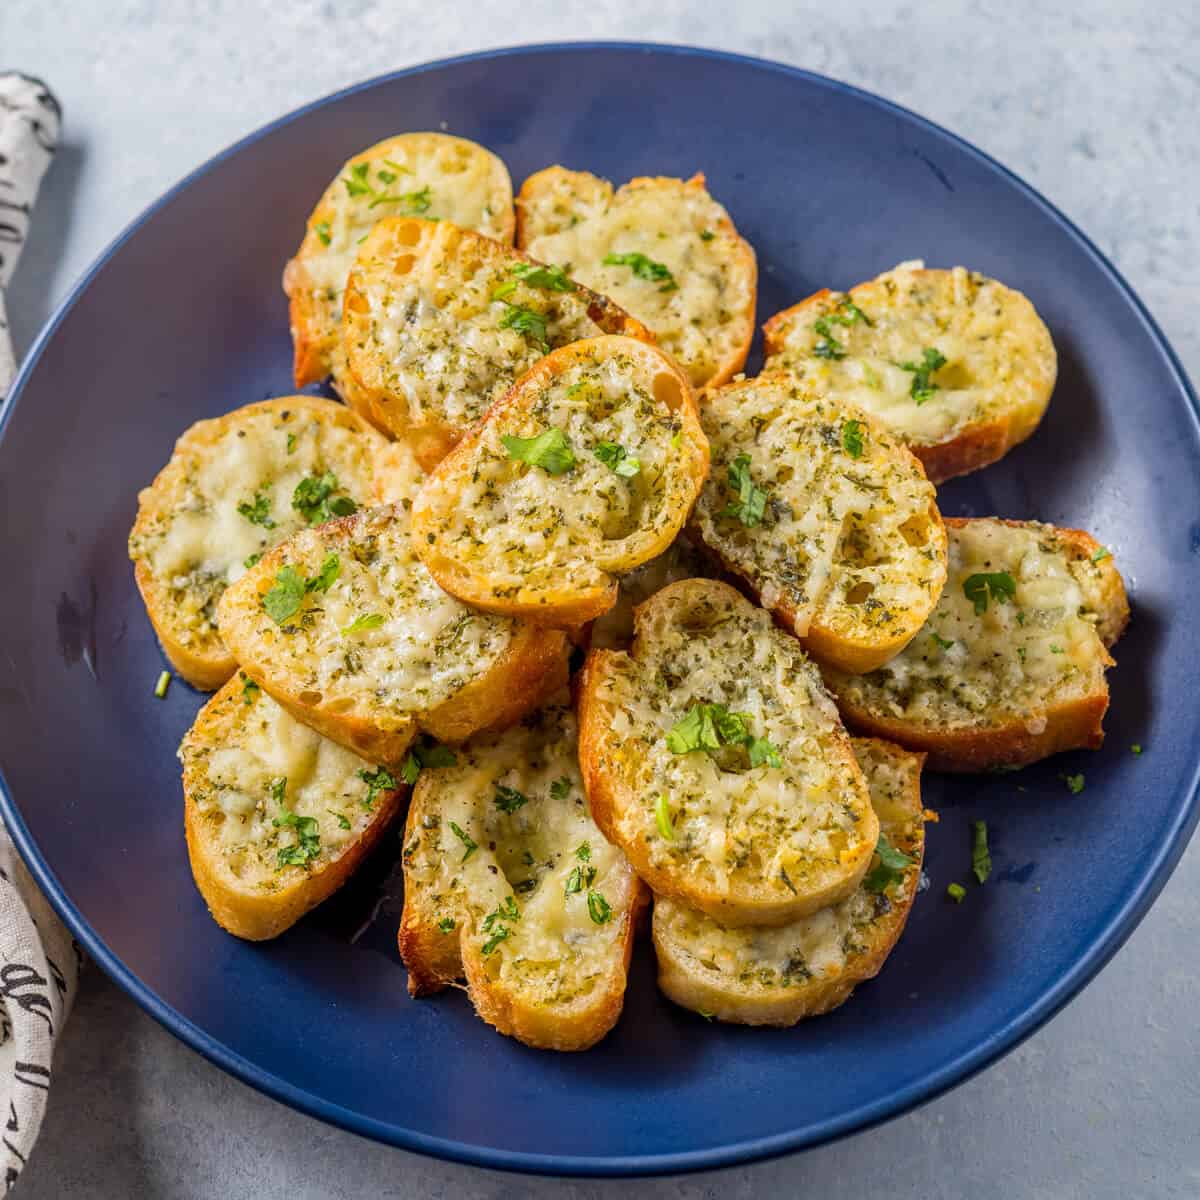 A plate of garlic bread made with a baguette.